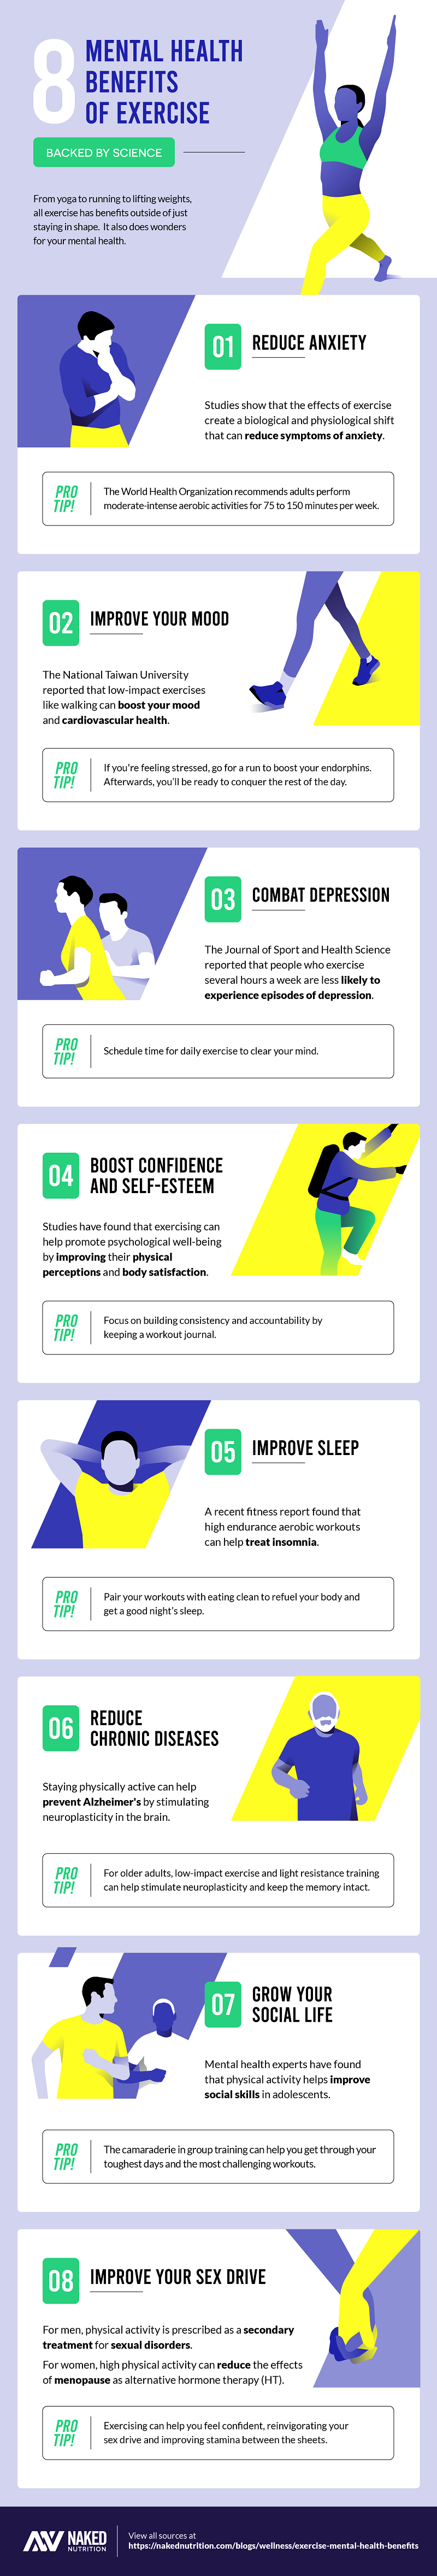 mental health benefits of exercise infographic